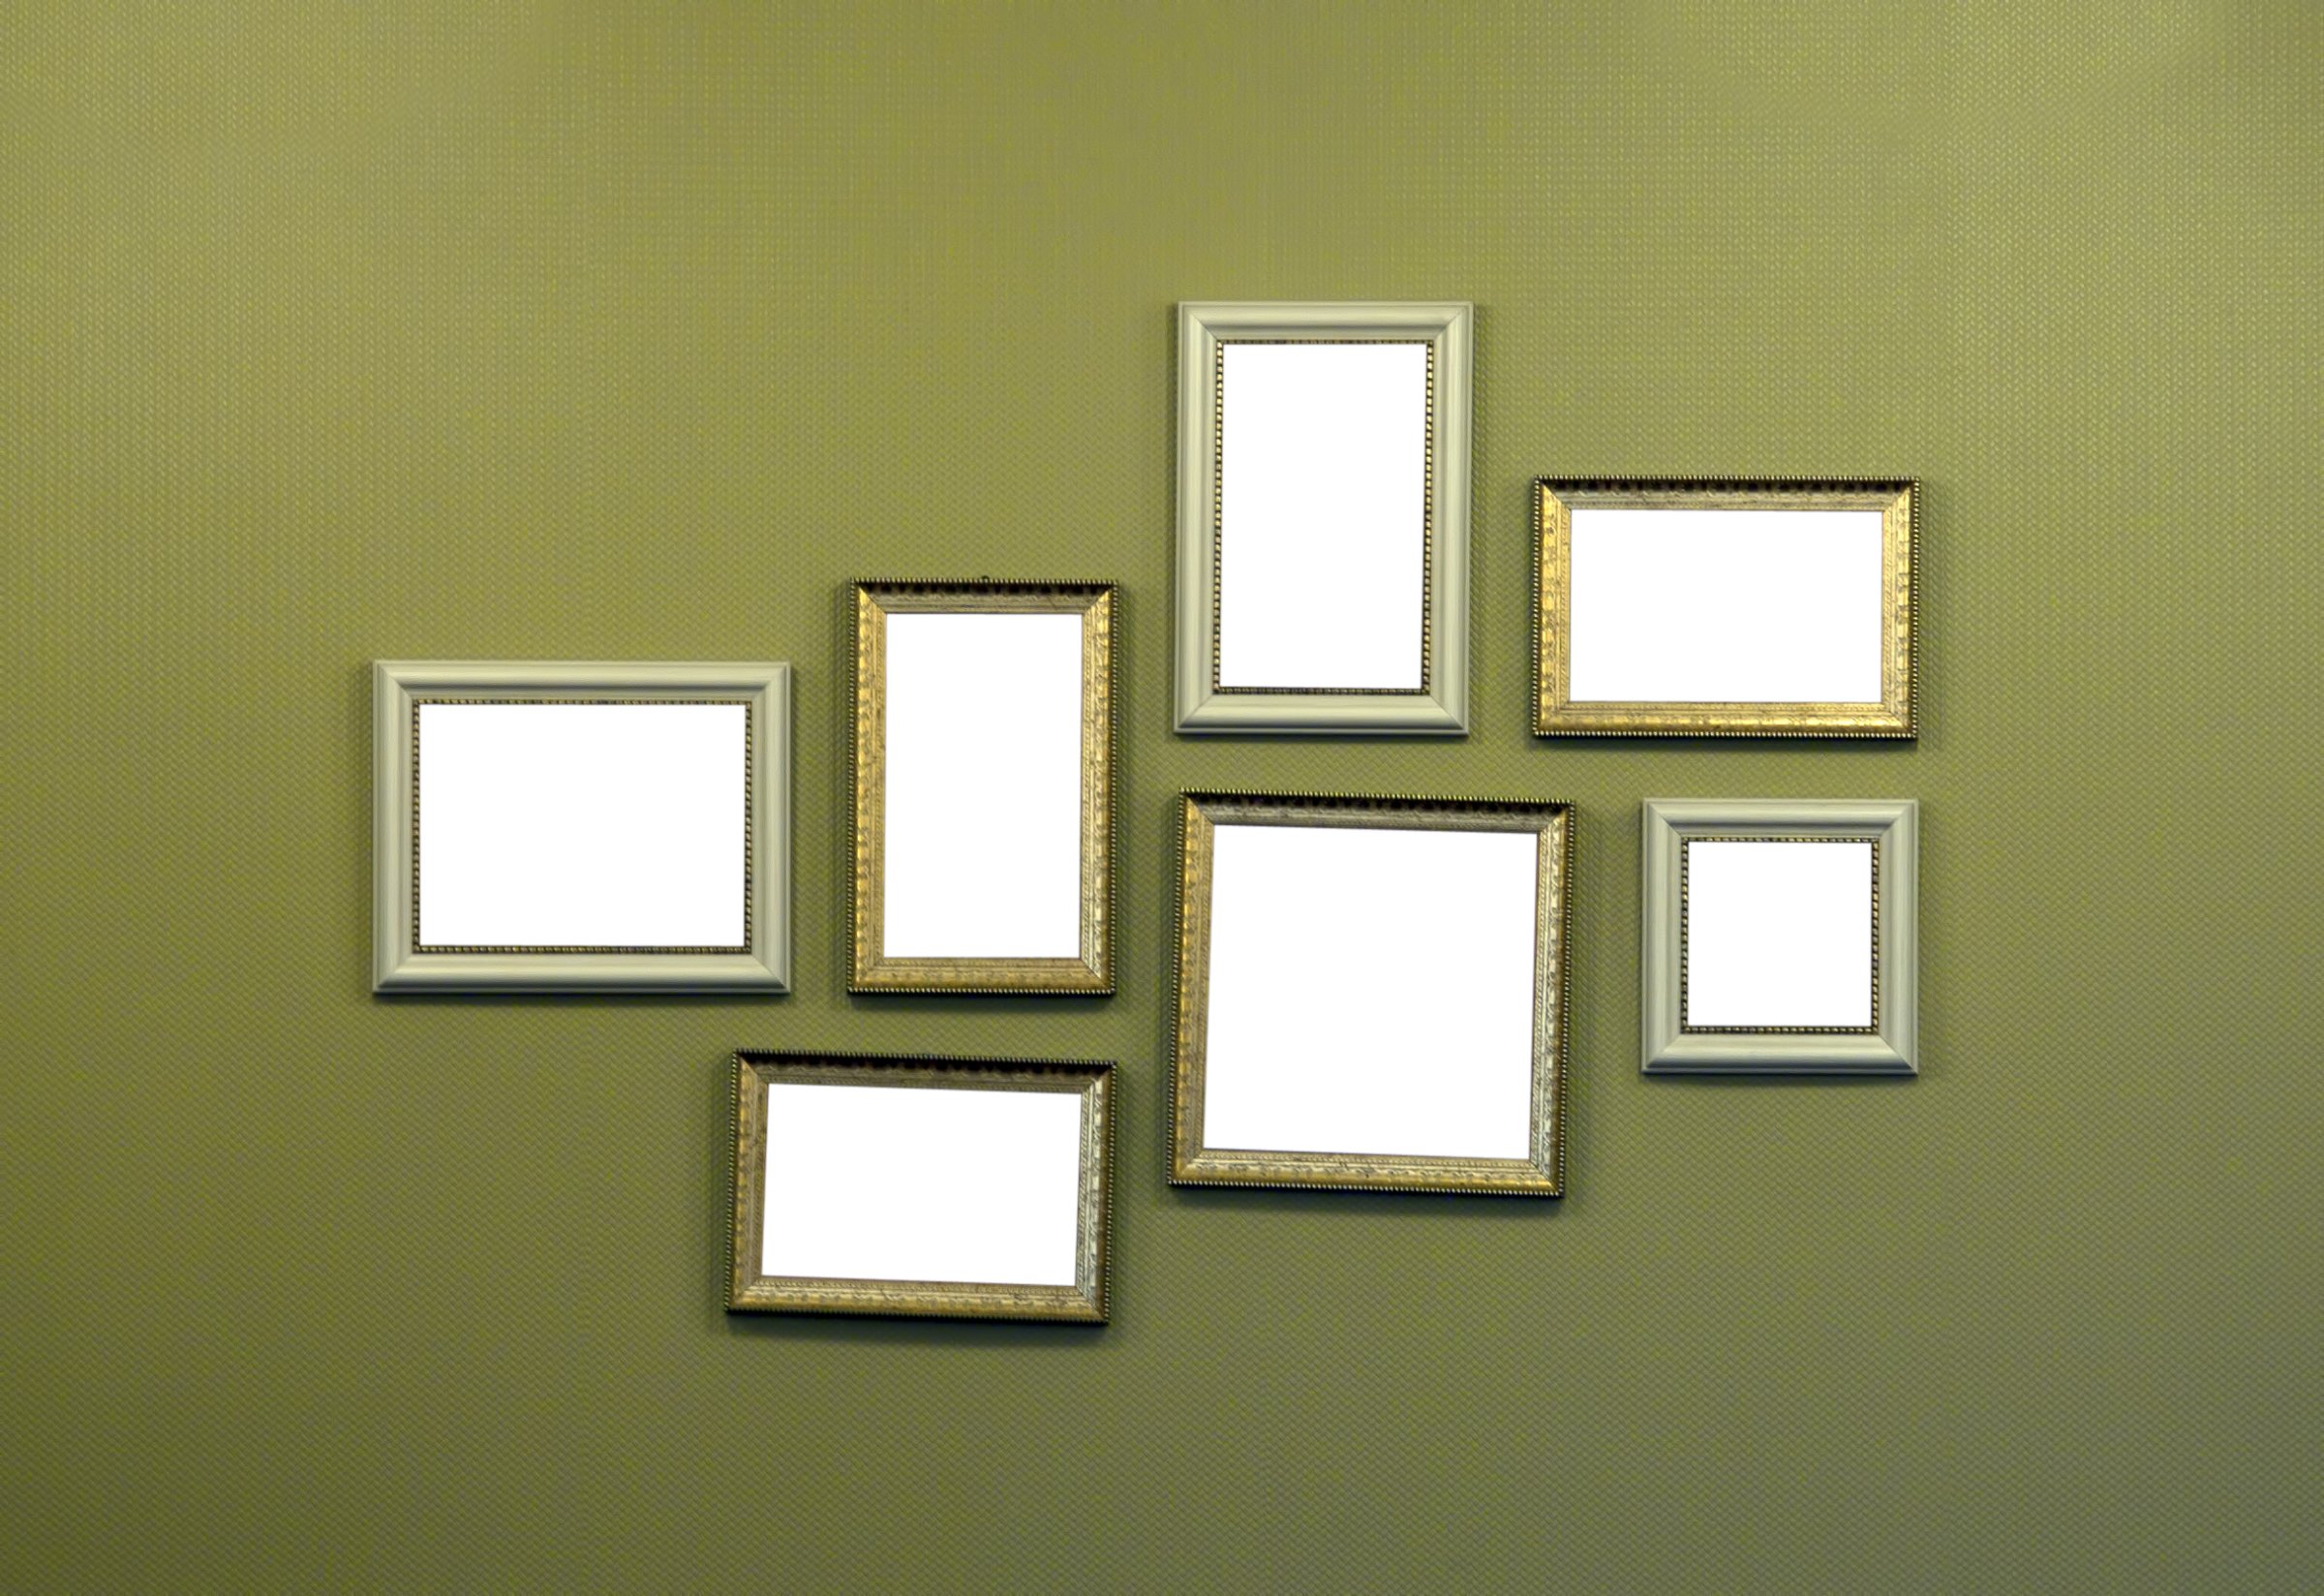 Frames on the wall